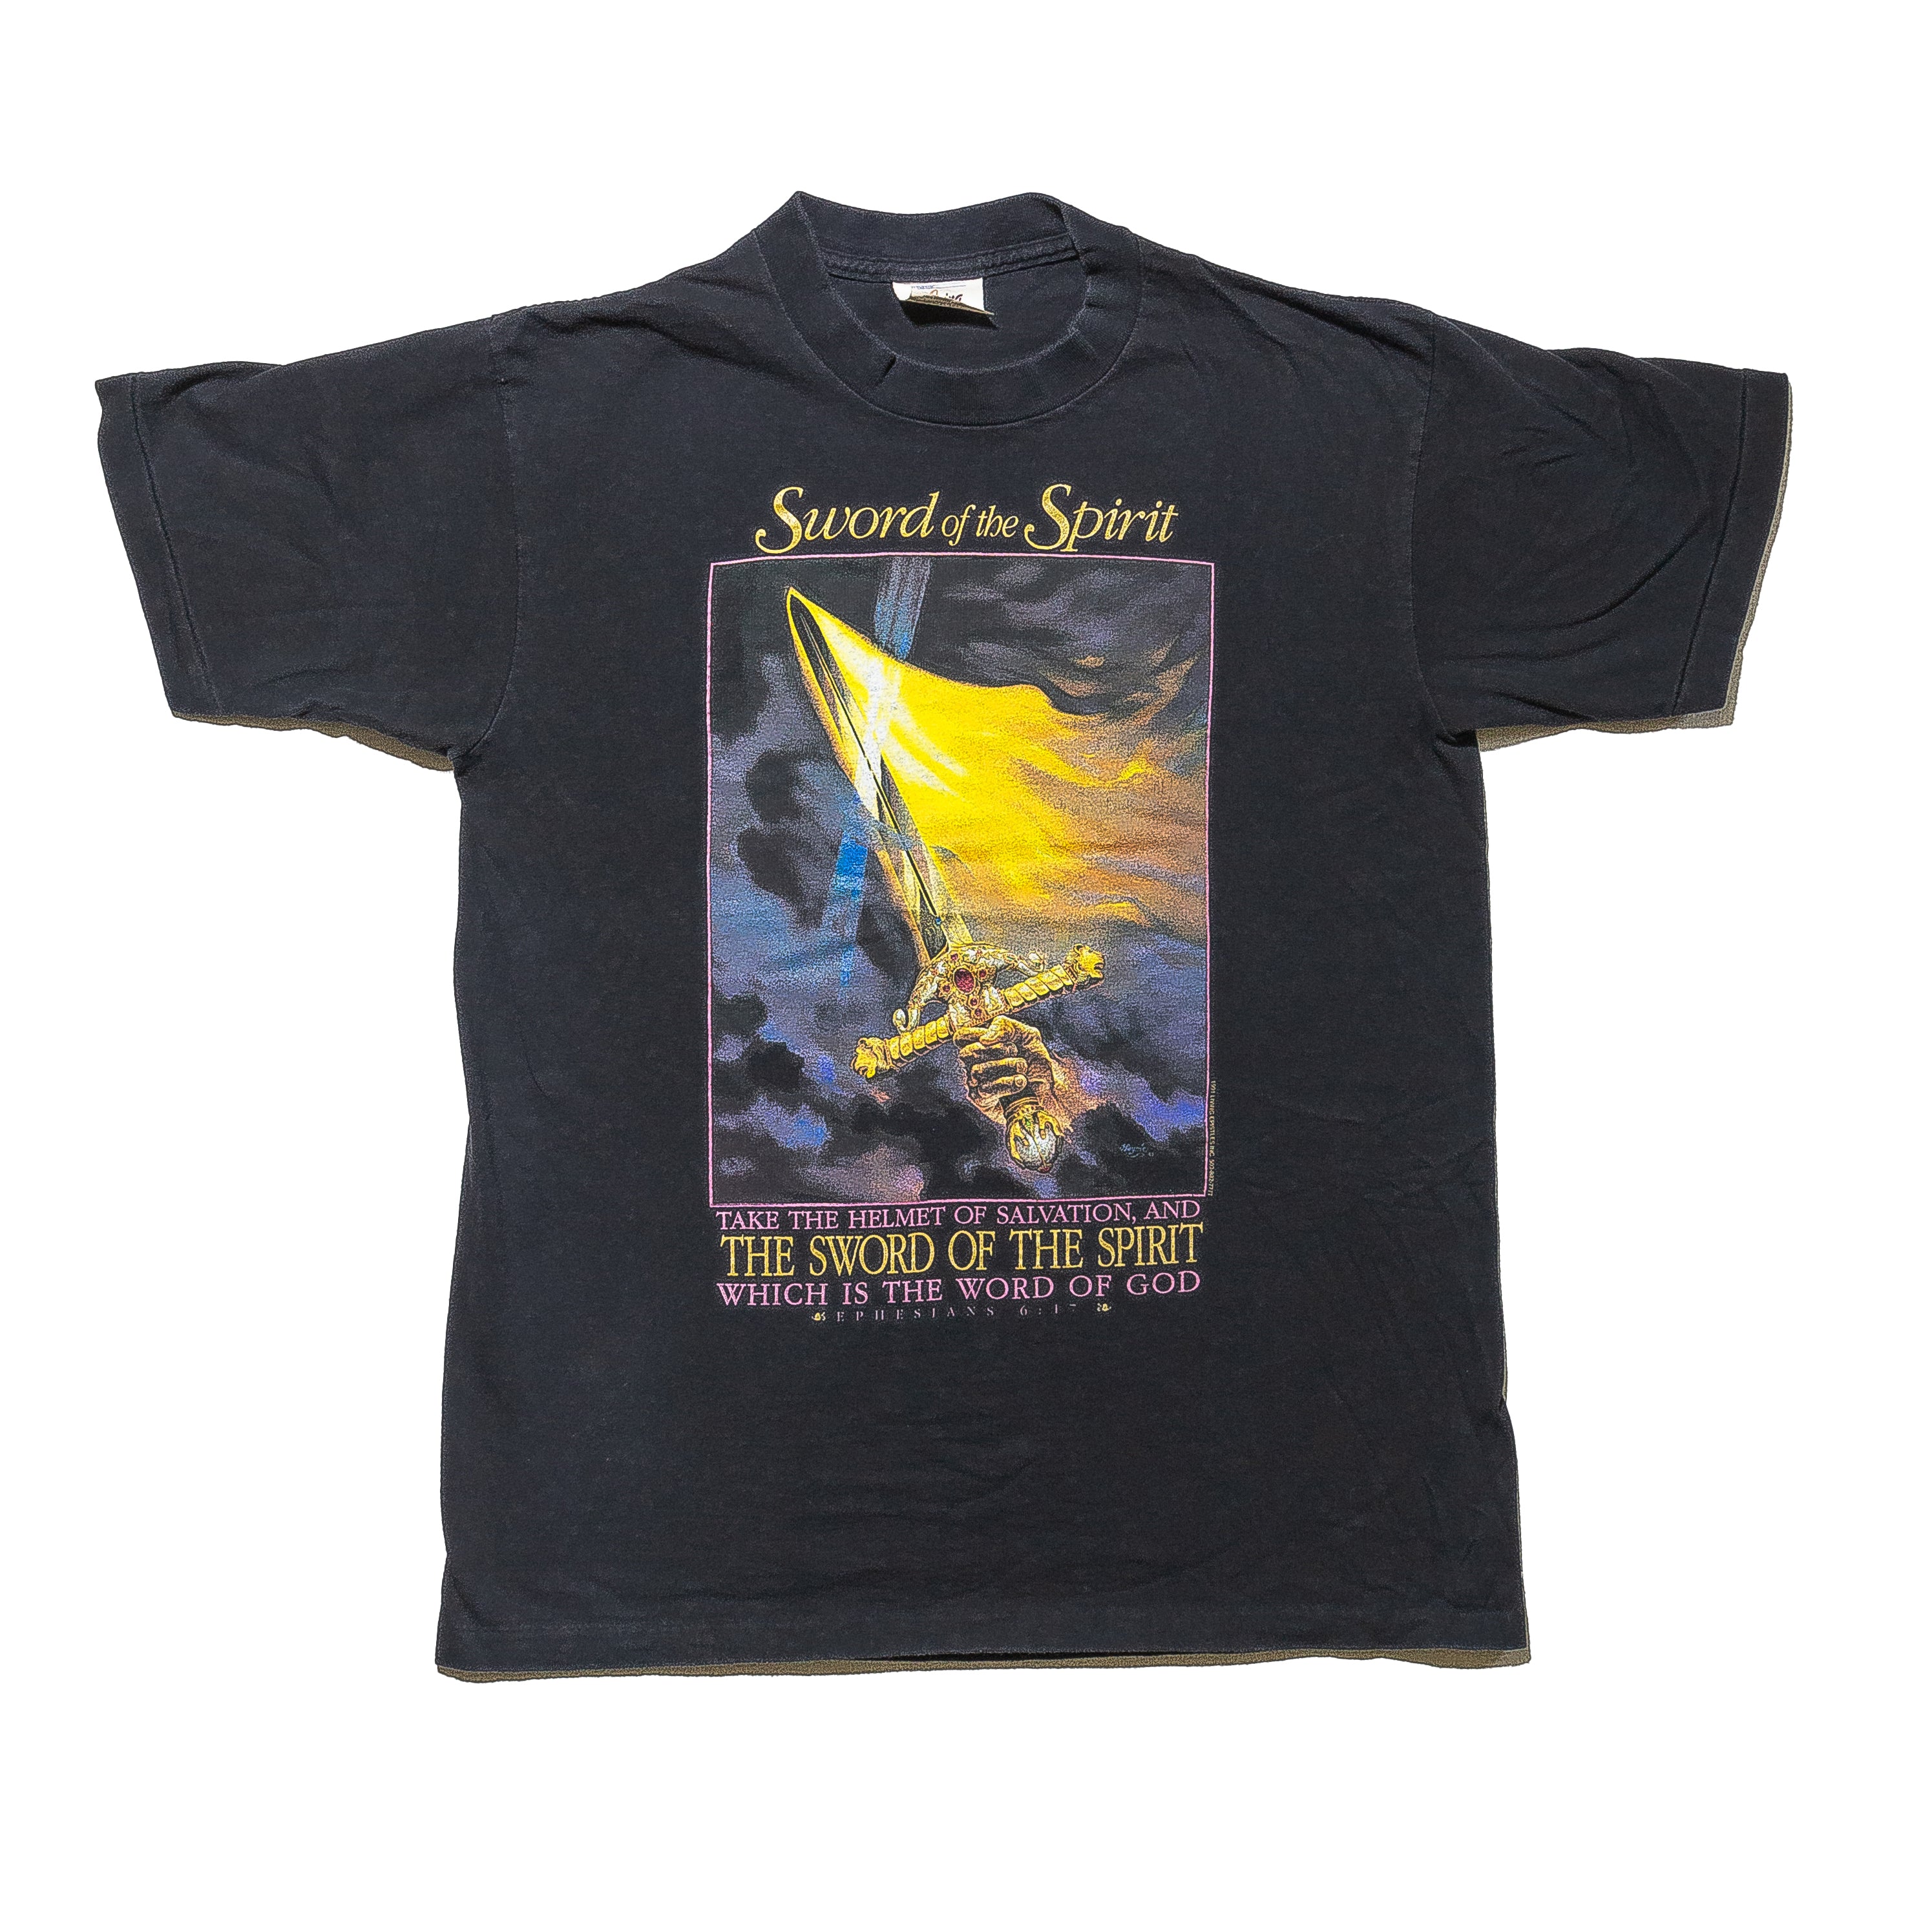 Vintage Jesus Tee Shirts in Size Large and XLarge – Page 4